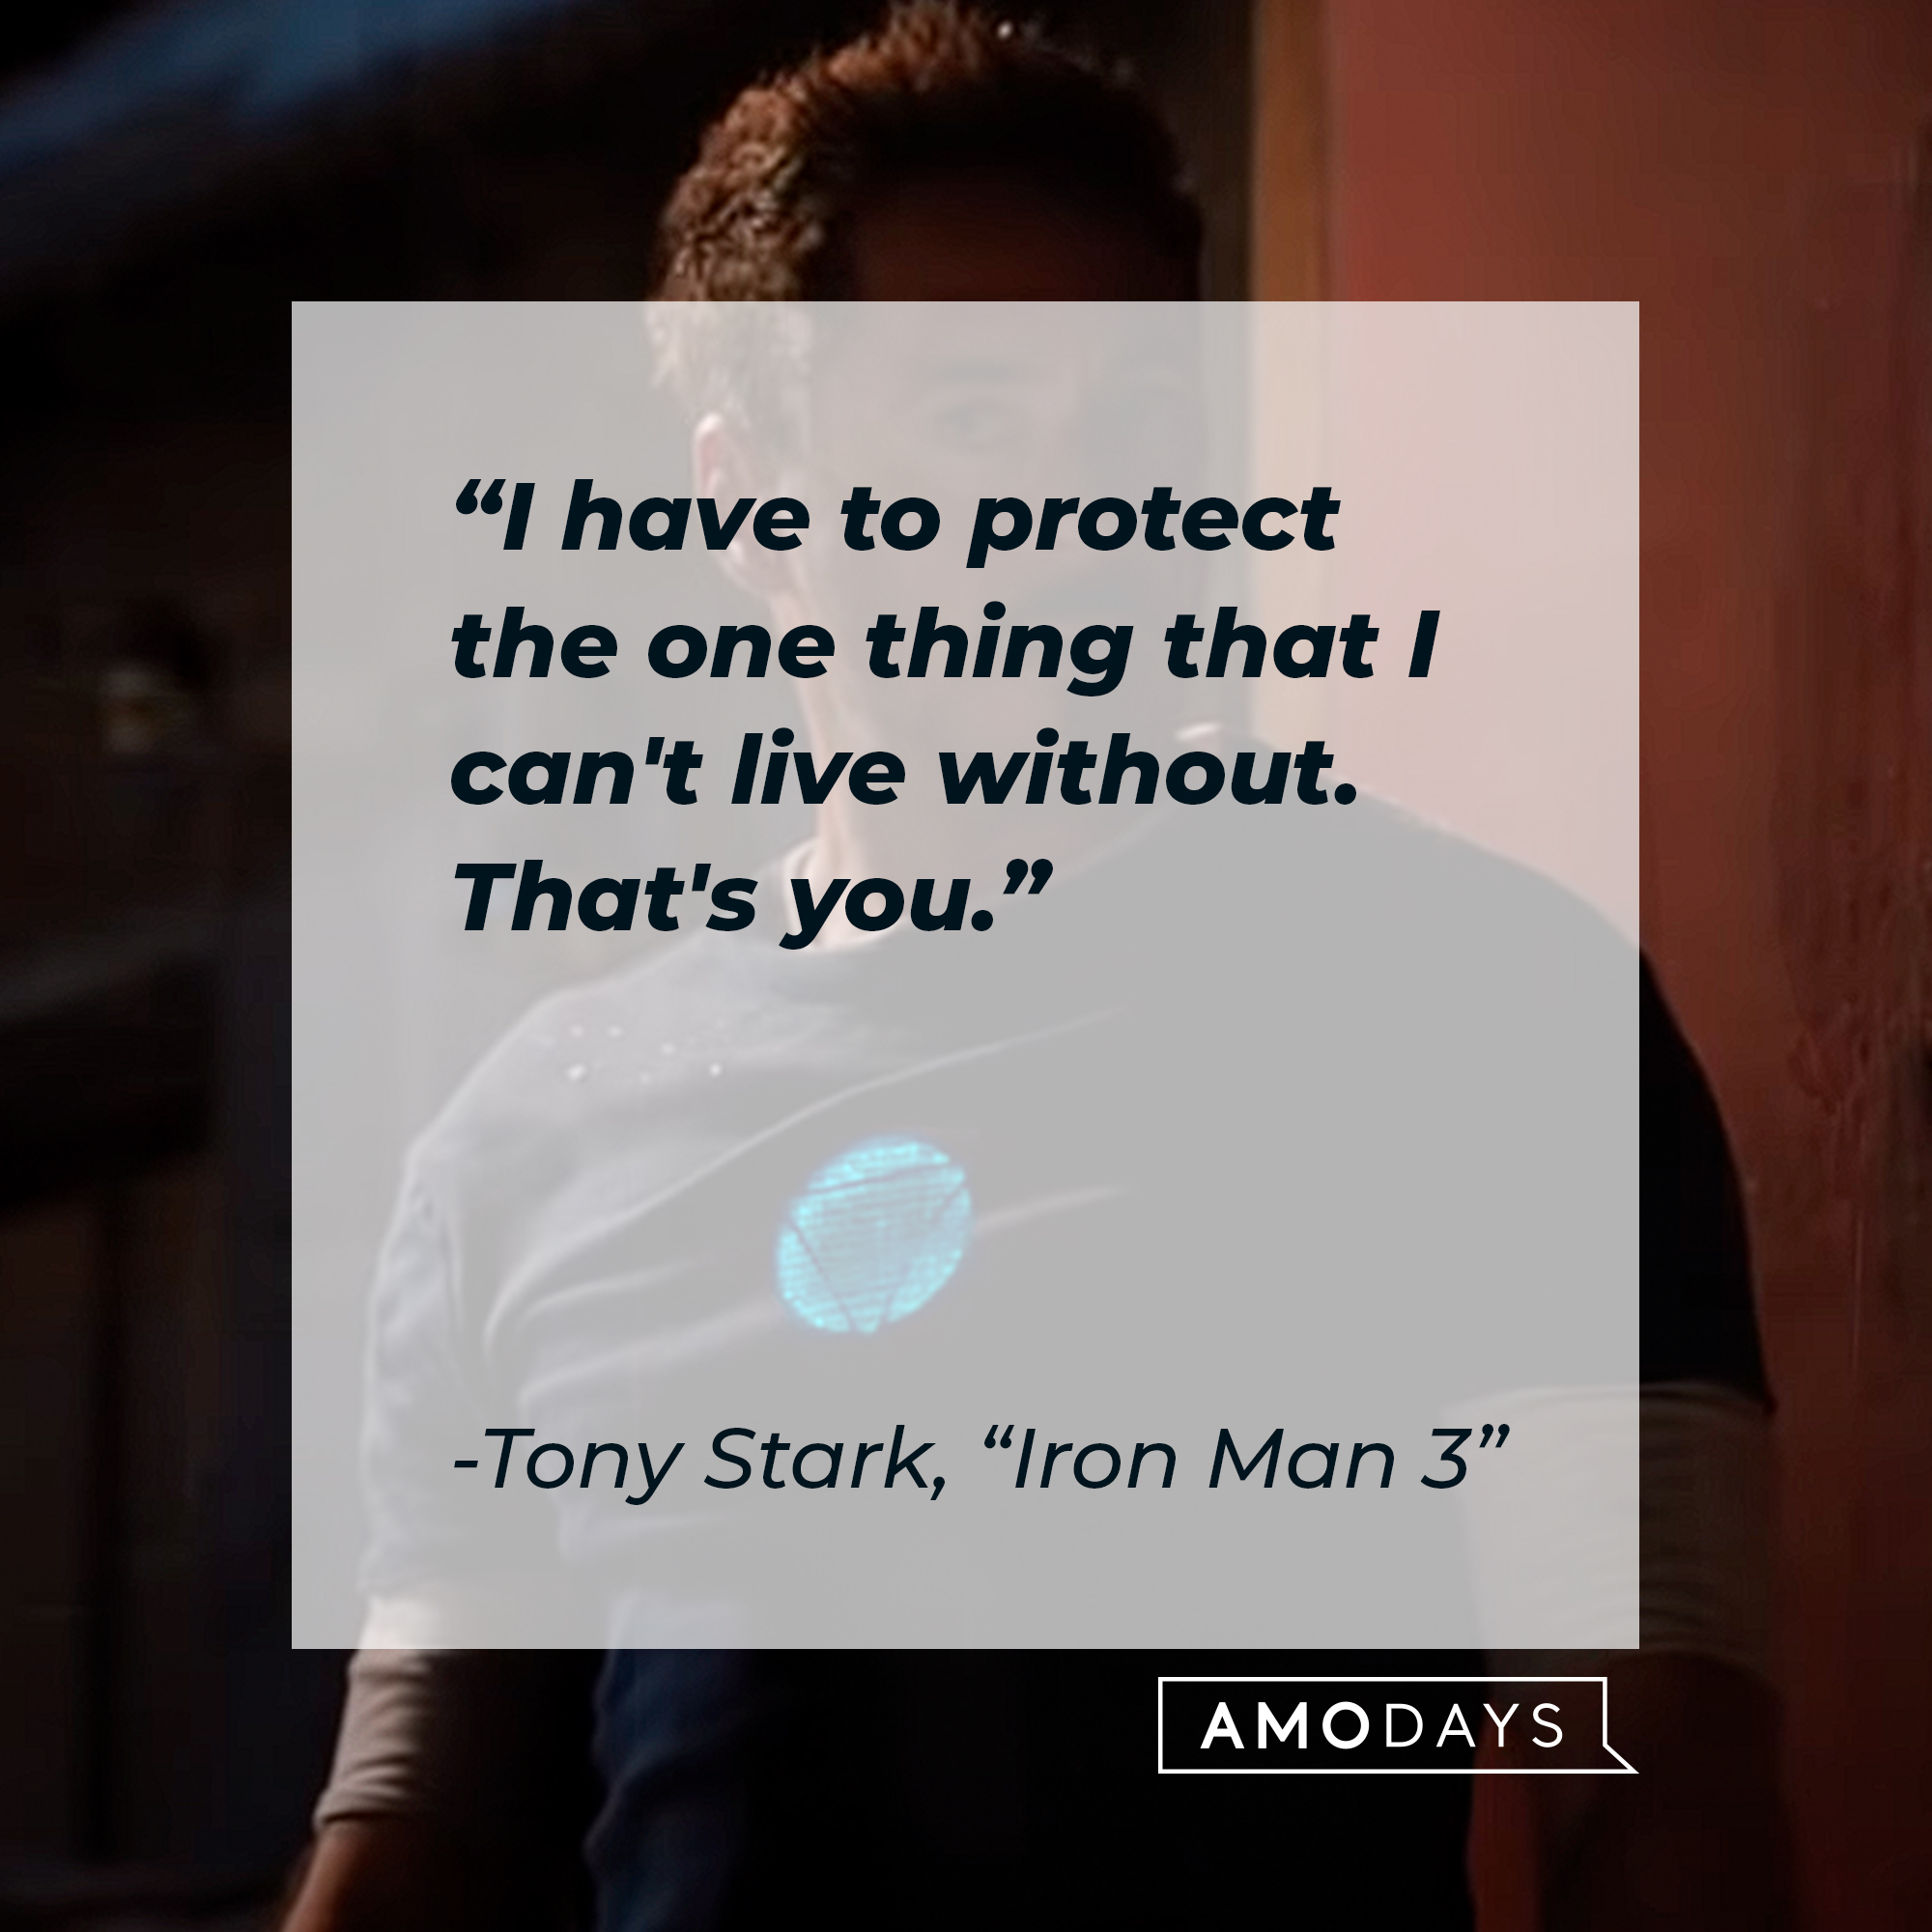 Tony Stark’s quote: "I have to protect the one thing that I can't live without. That's you." | Image: AmoDays